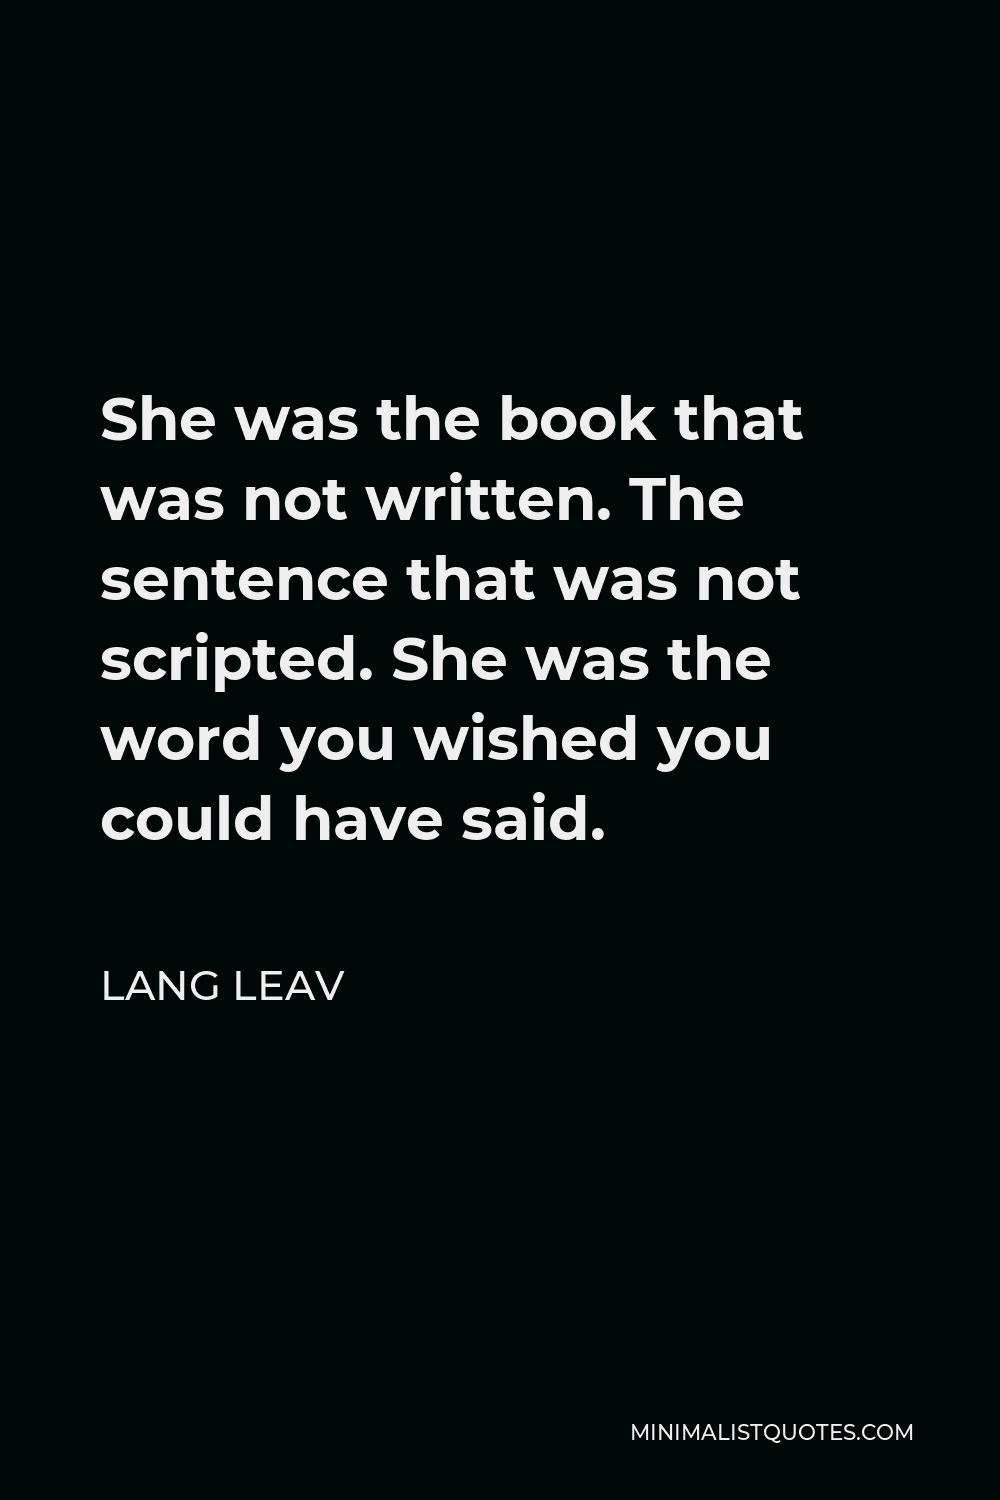 Lang Leav Quote - She was the book that was not written. The sentence that was not scripted. She was the word you wished you could have said.